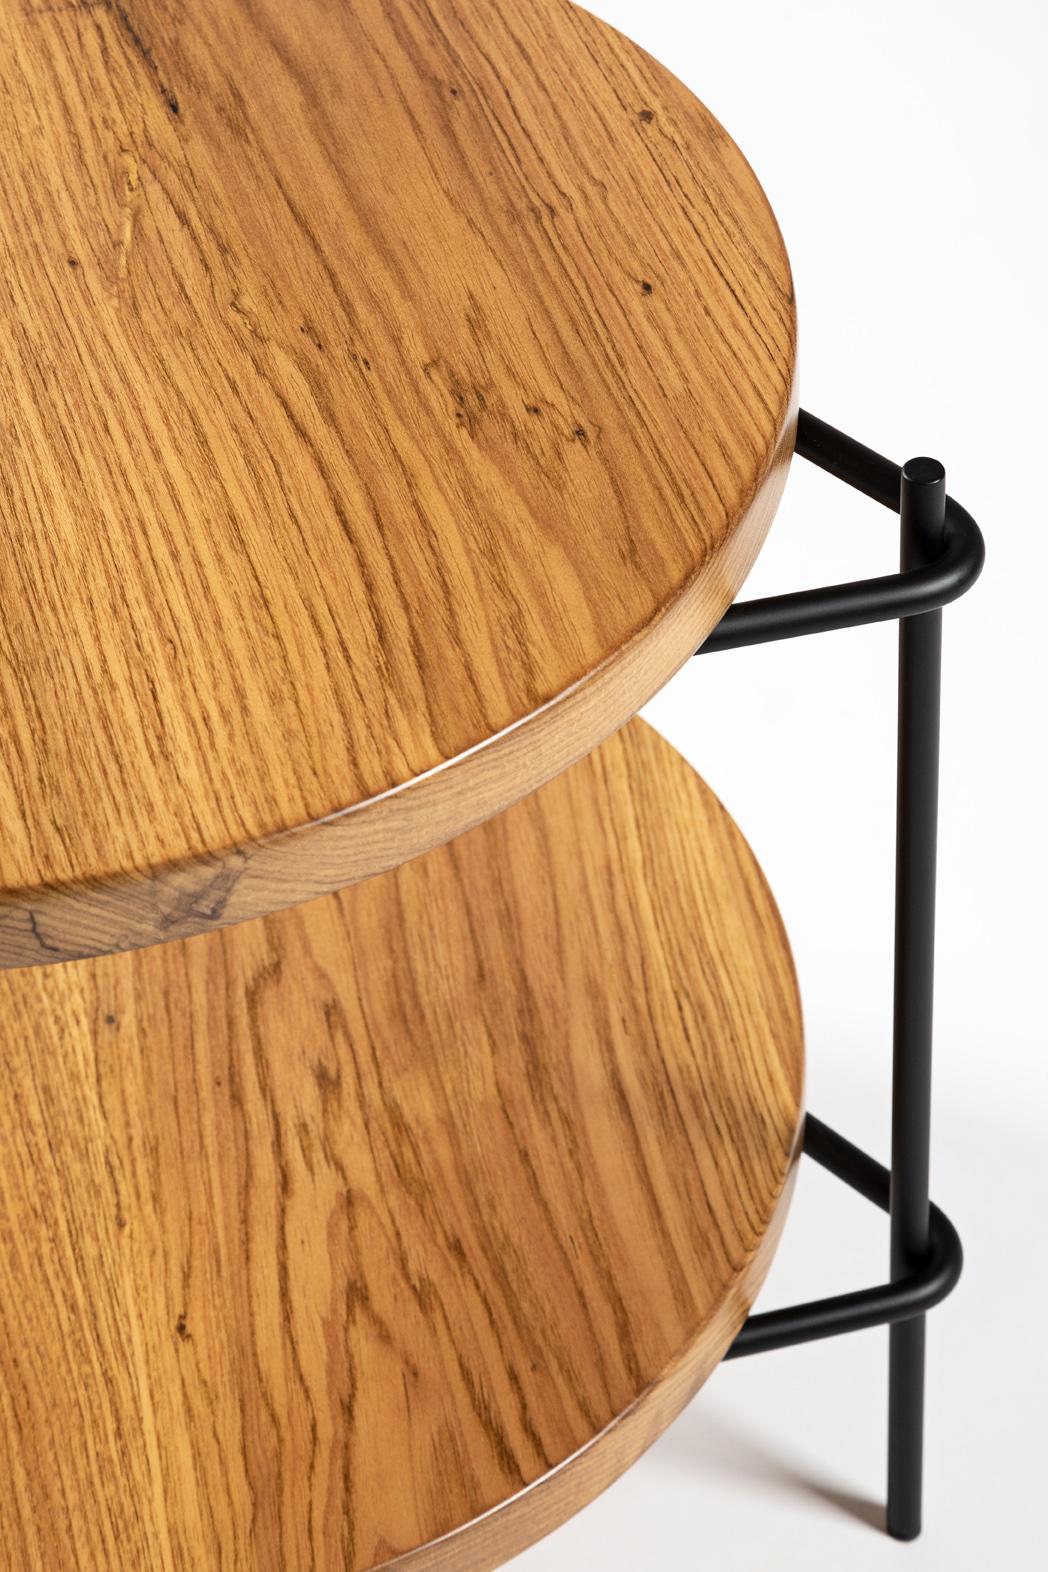 This versatile minimalist side table in solid Brazilian wood 